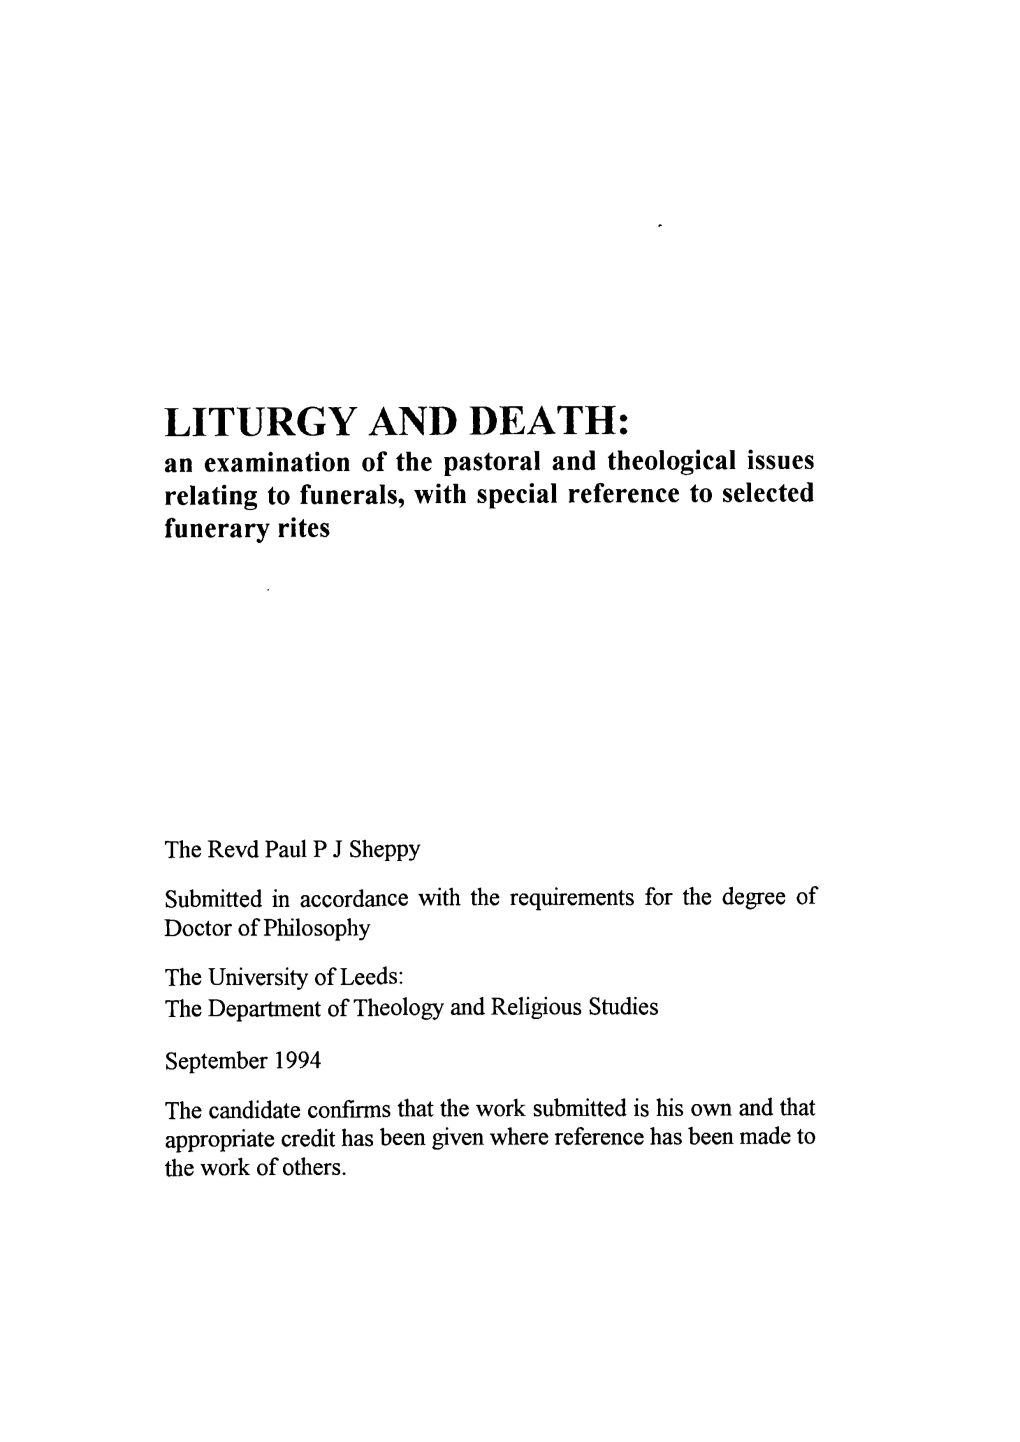 LITURGY and DEATH: an Examination of the Pastoral and Theological Issues Relating to Funerals, with Special Reference to Selected Funerary Rites